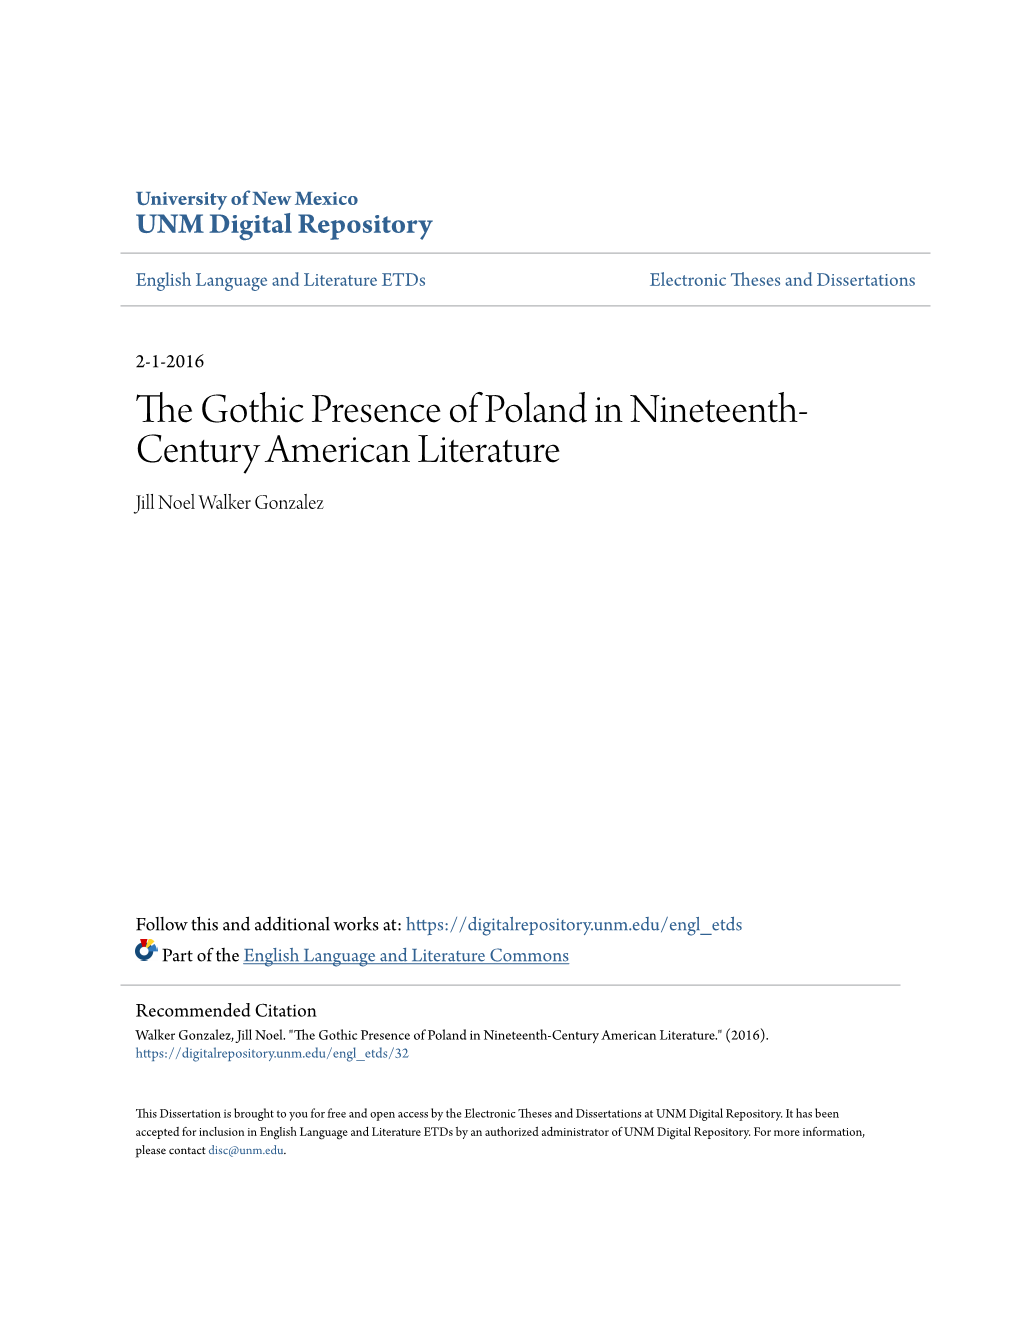 The Gothic Presence of Poland in Nineteenth-Century American